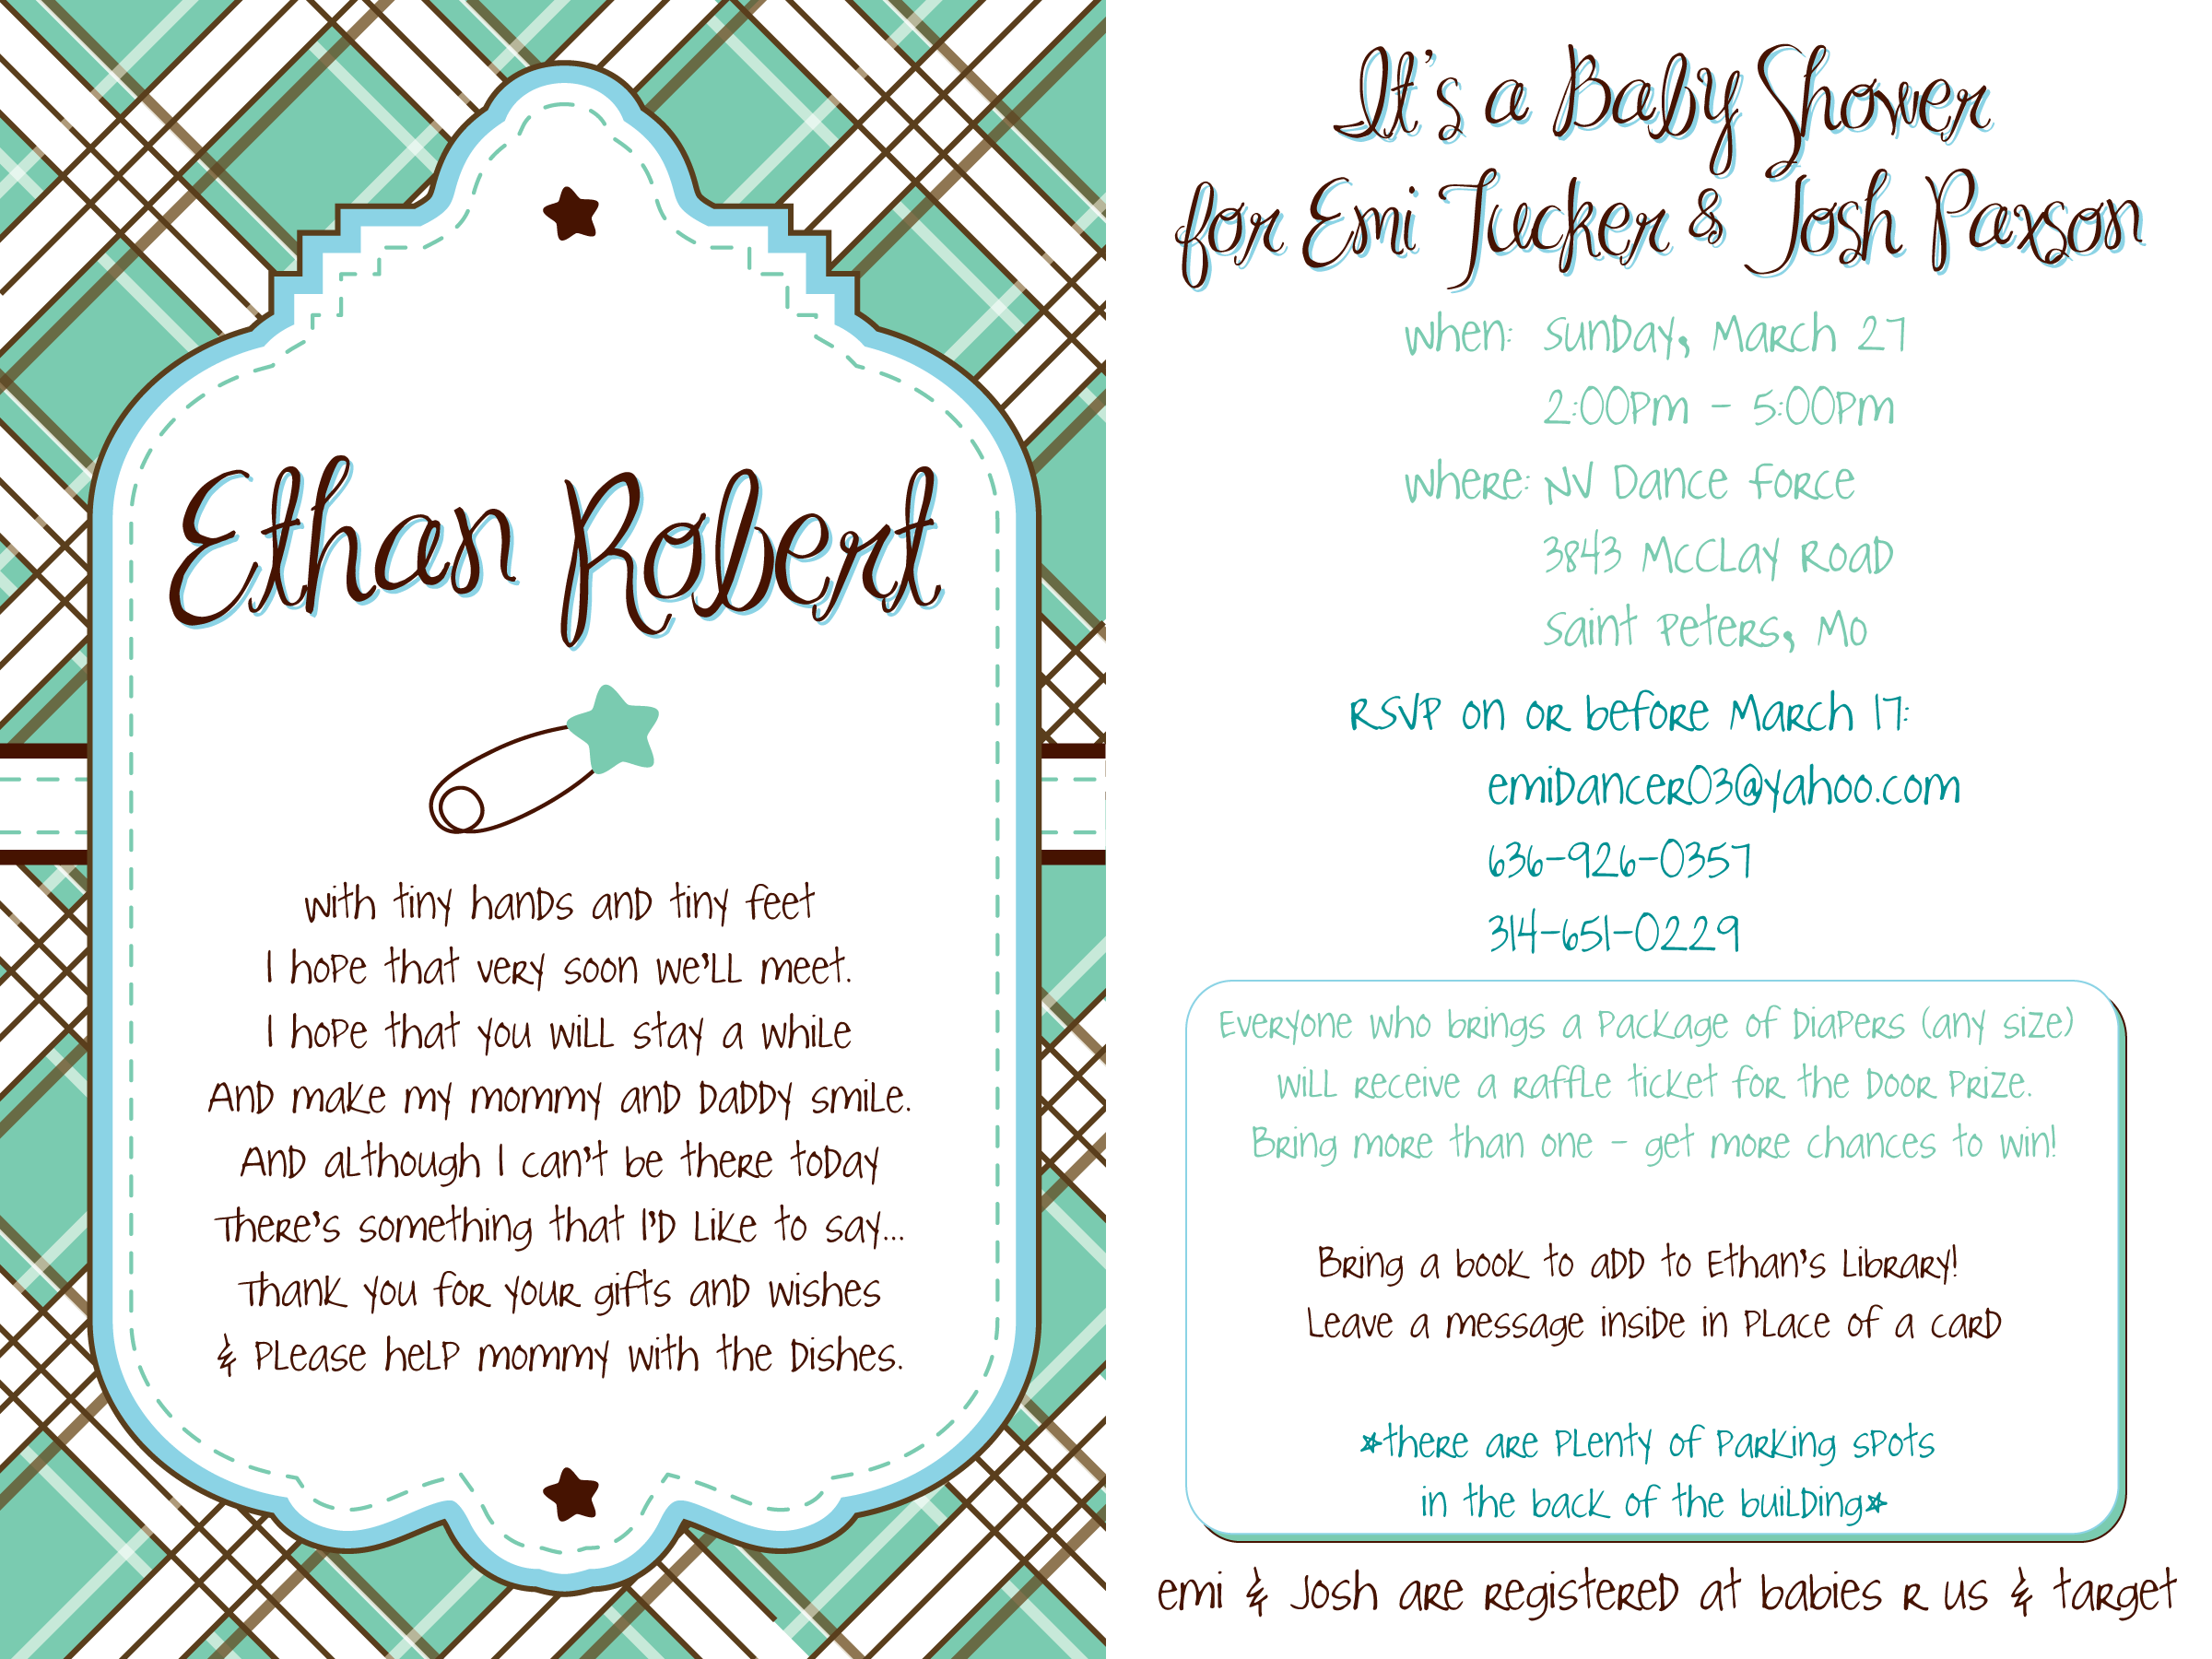 Full Size of Baby Shower:delightful Baby Shower Invitation Wording Picture Designs Baby Shower Invitation Wording Printable Baby Shower Invite Wording For A Boy With Blue Modern Inspirational Hd Photo Wording